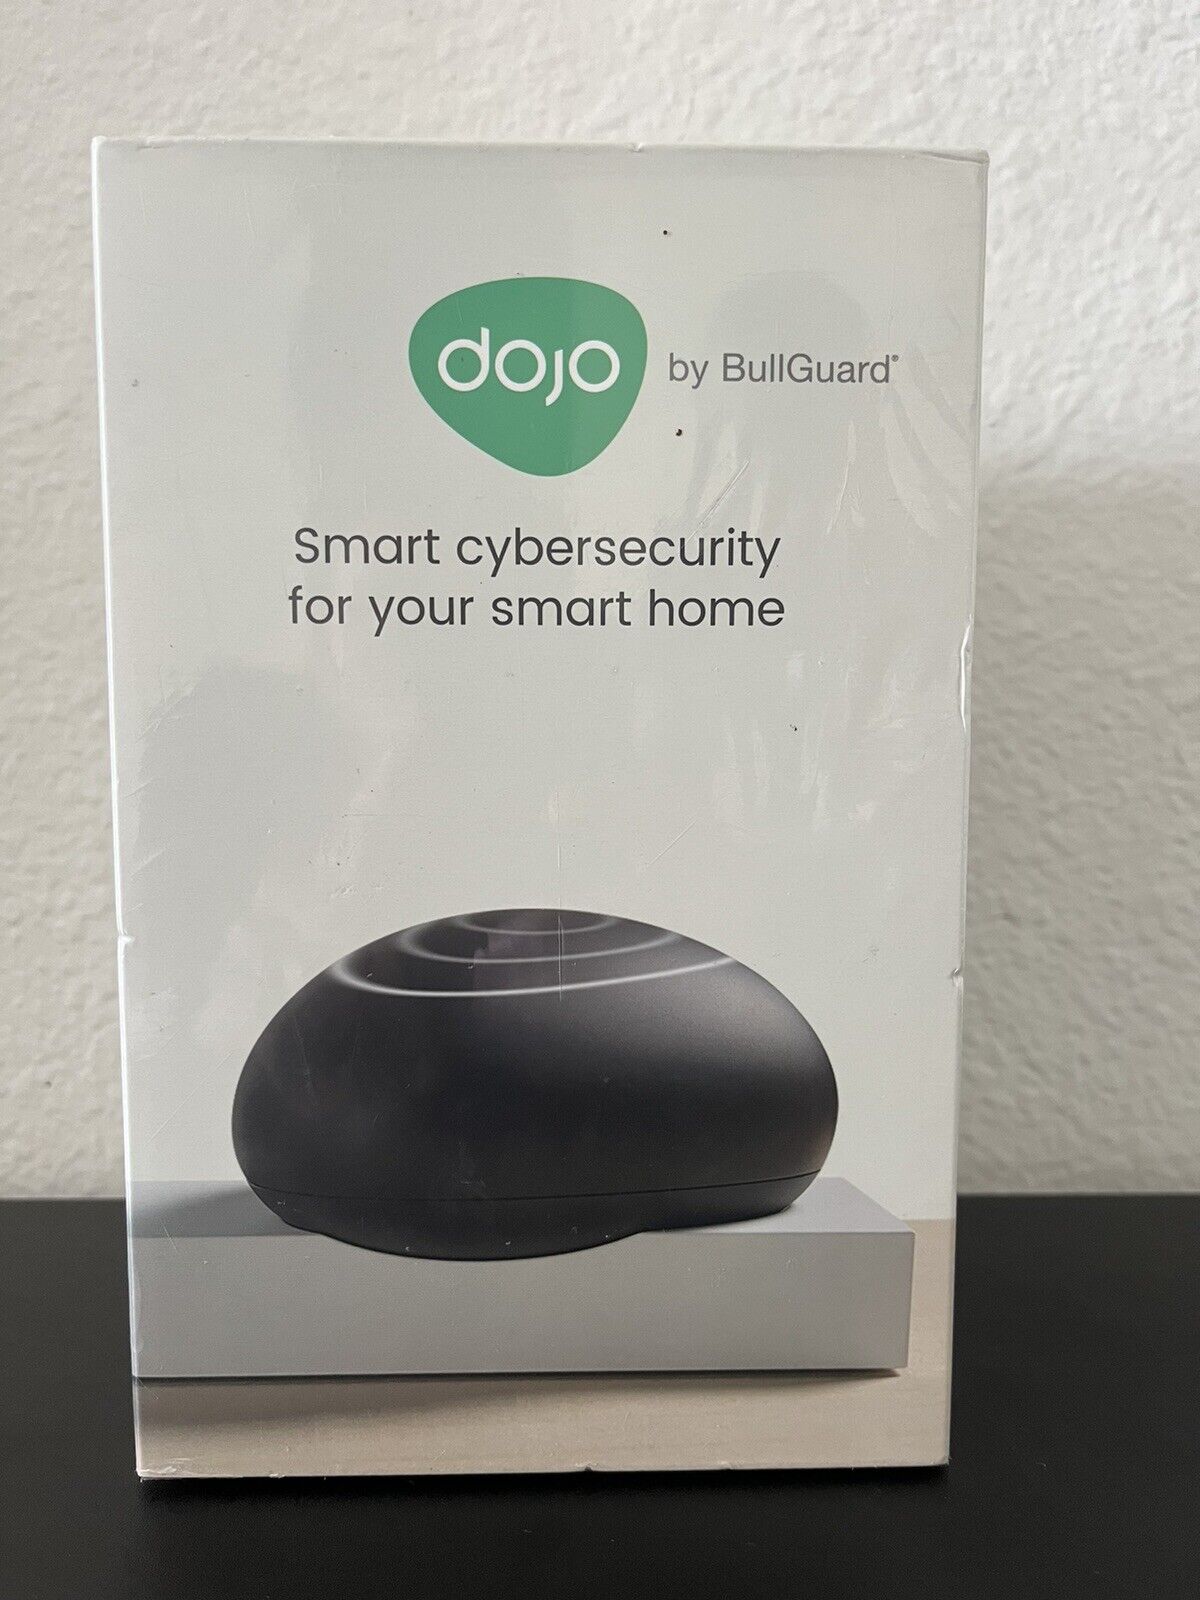 Dojo by BullGuard Smart Cybersecurity For Your Smart Home